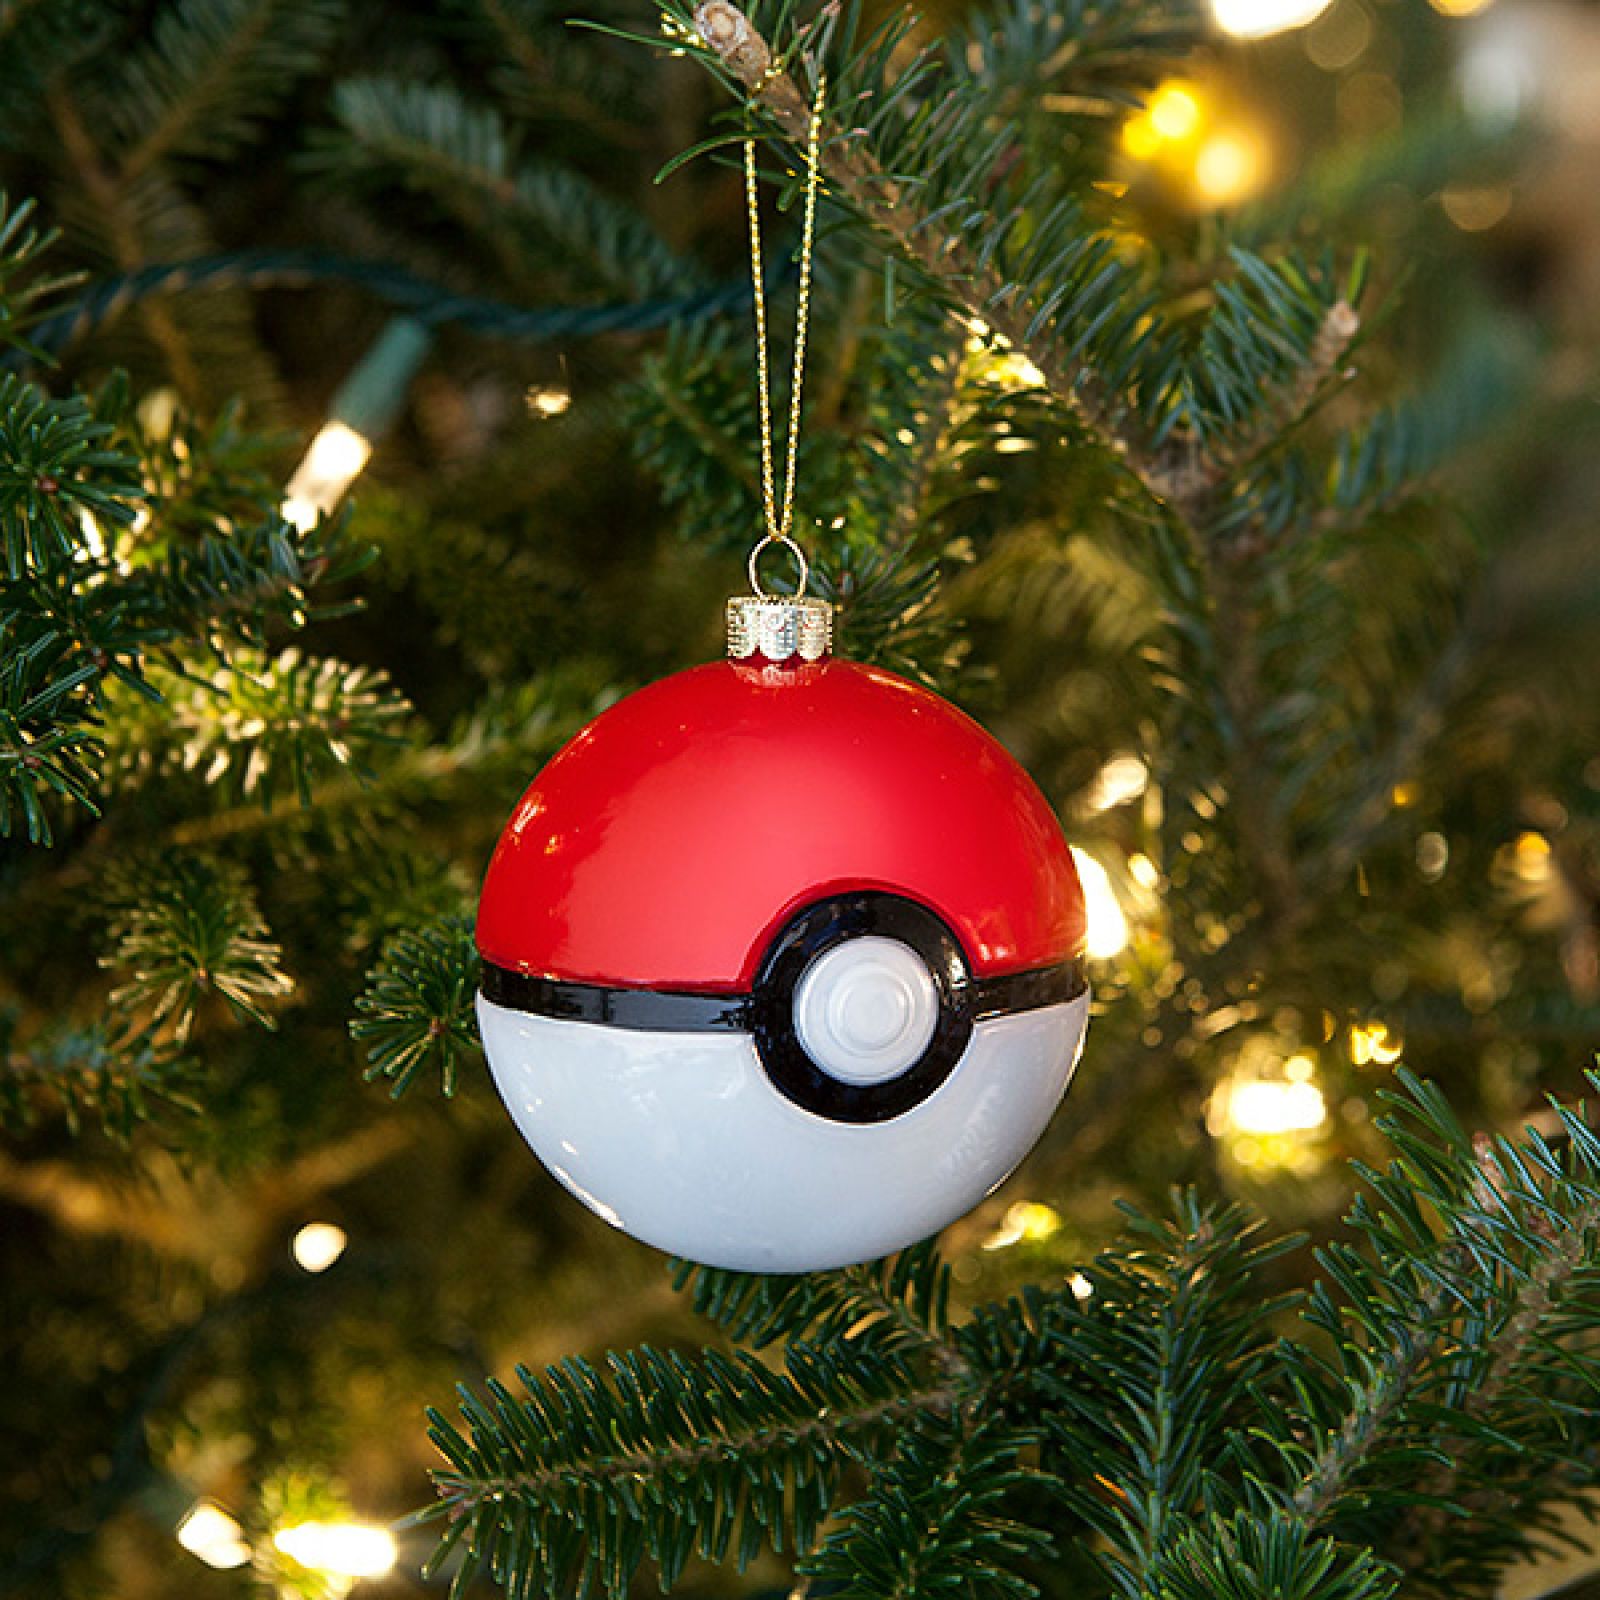 13 Best Christmas Decorations Every Geek Should Own image 14